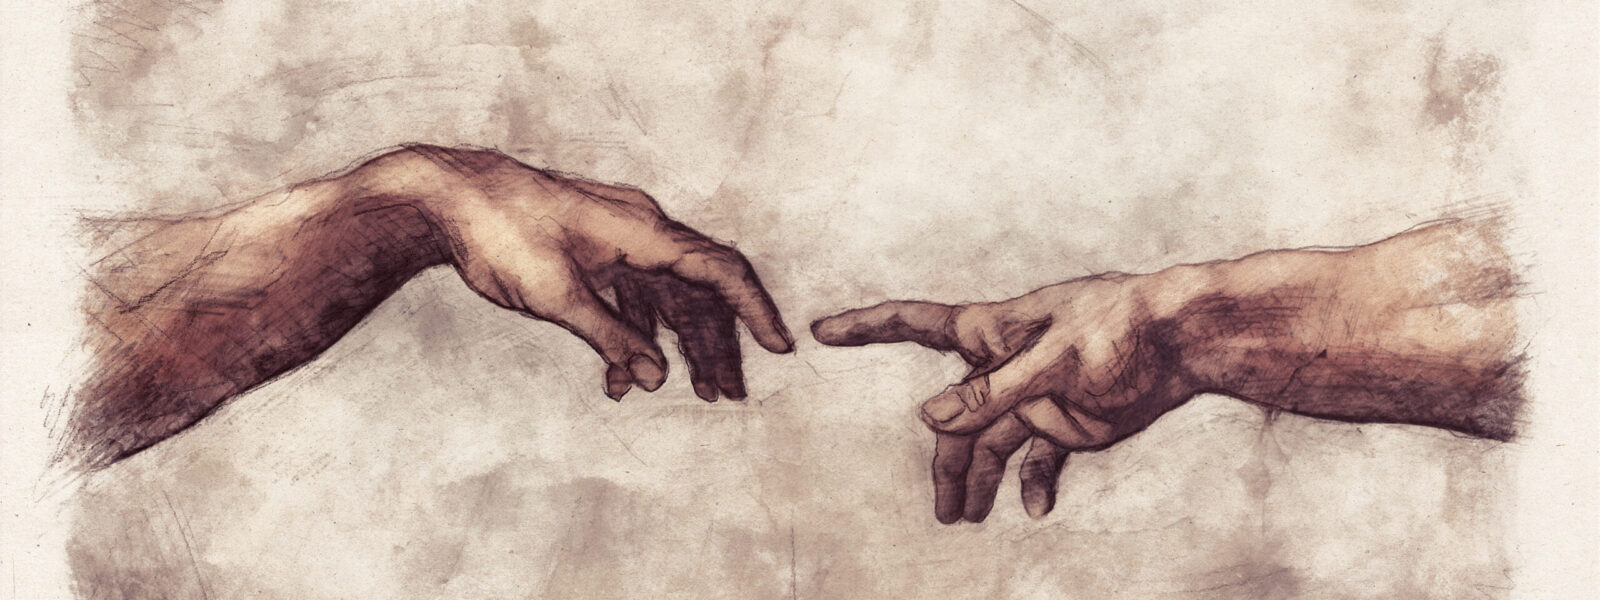 Hands reaching. Digital illustration sketch in the style of old renaissance drawings on paper.